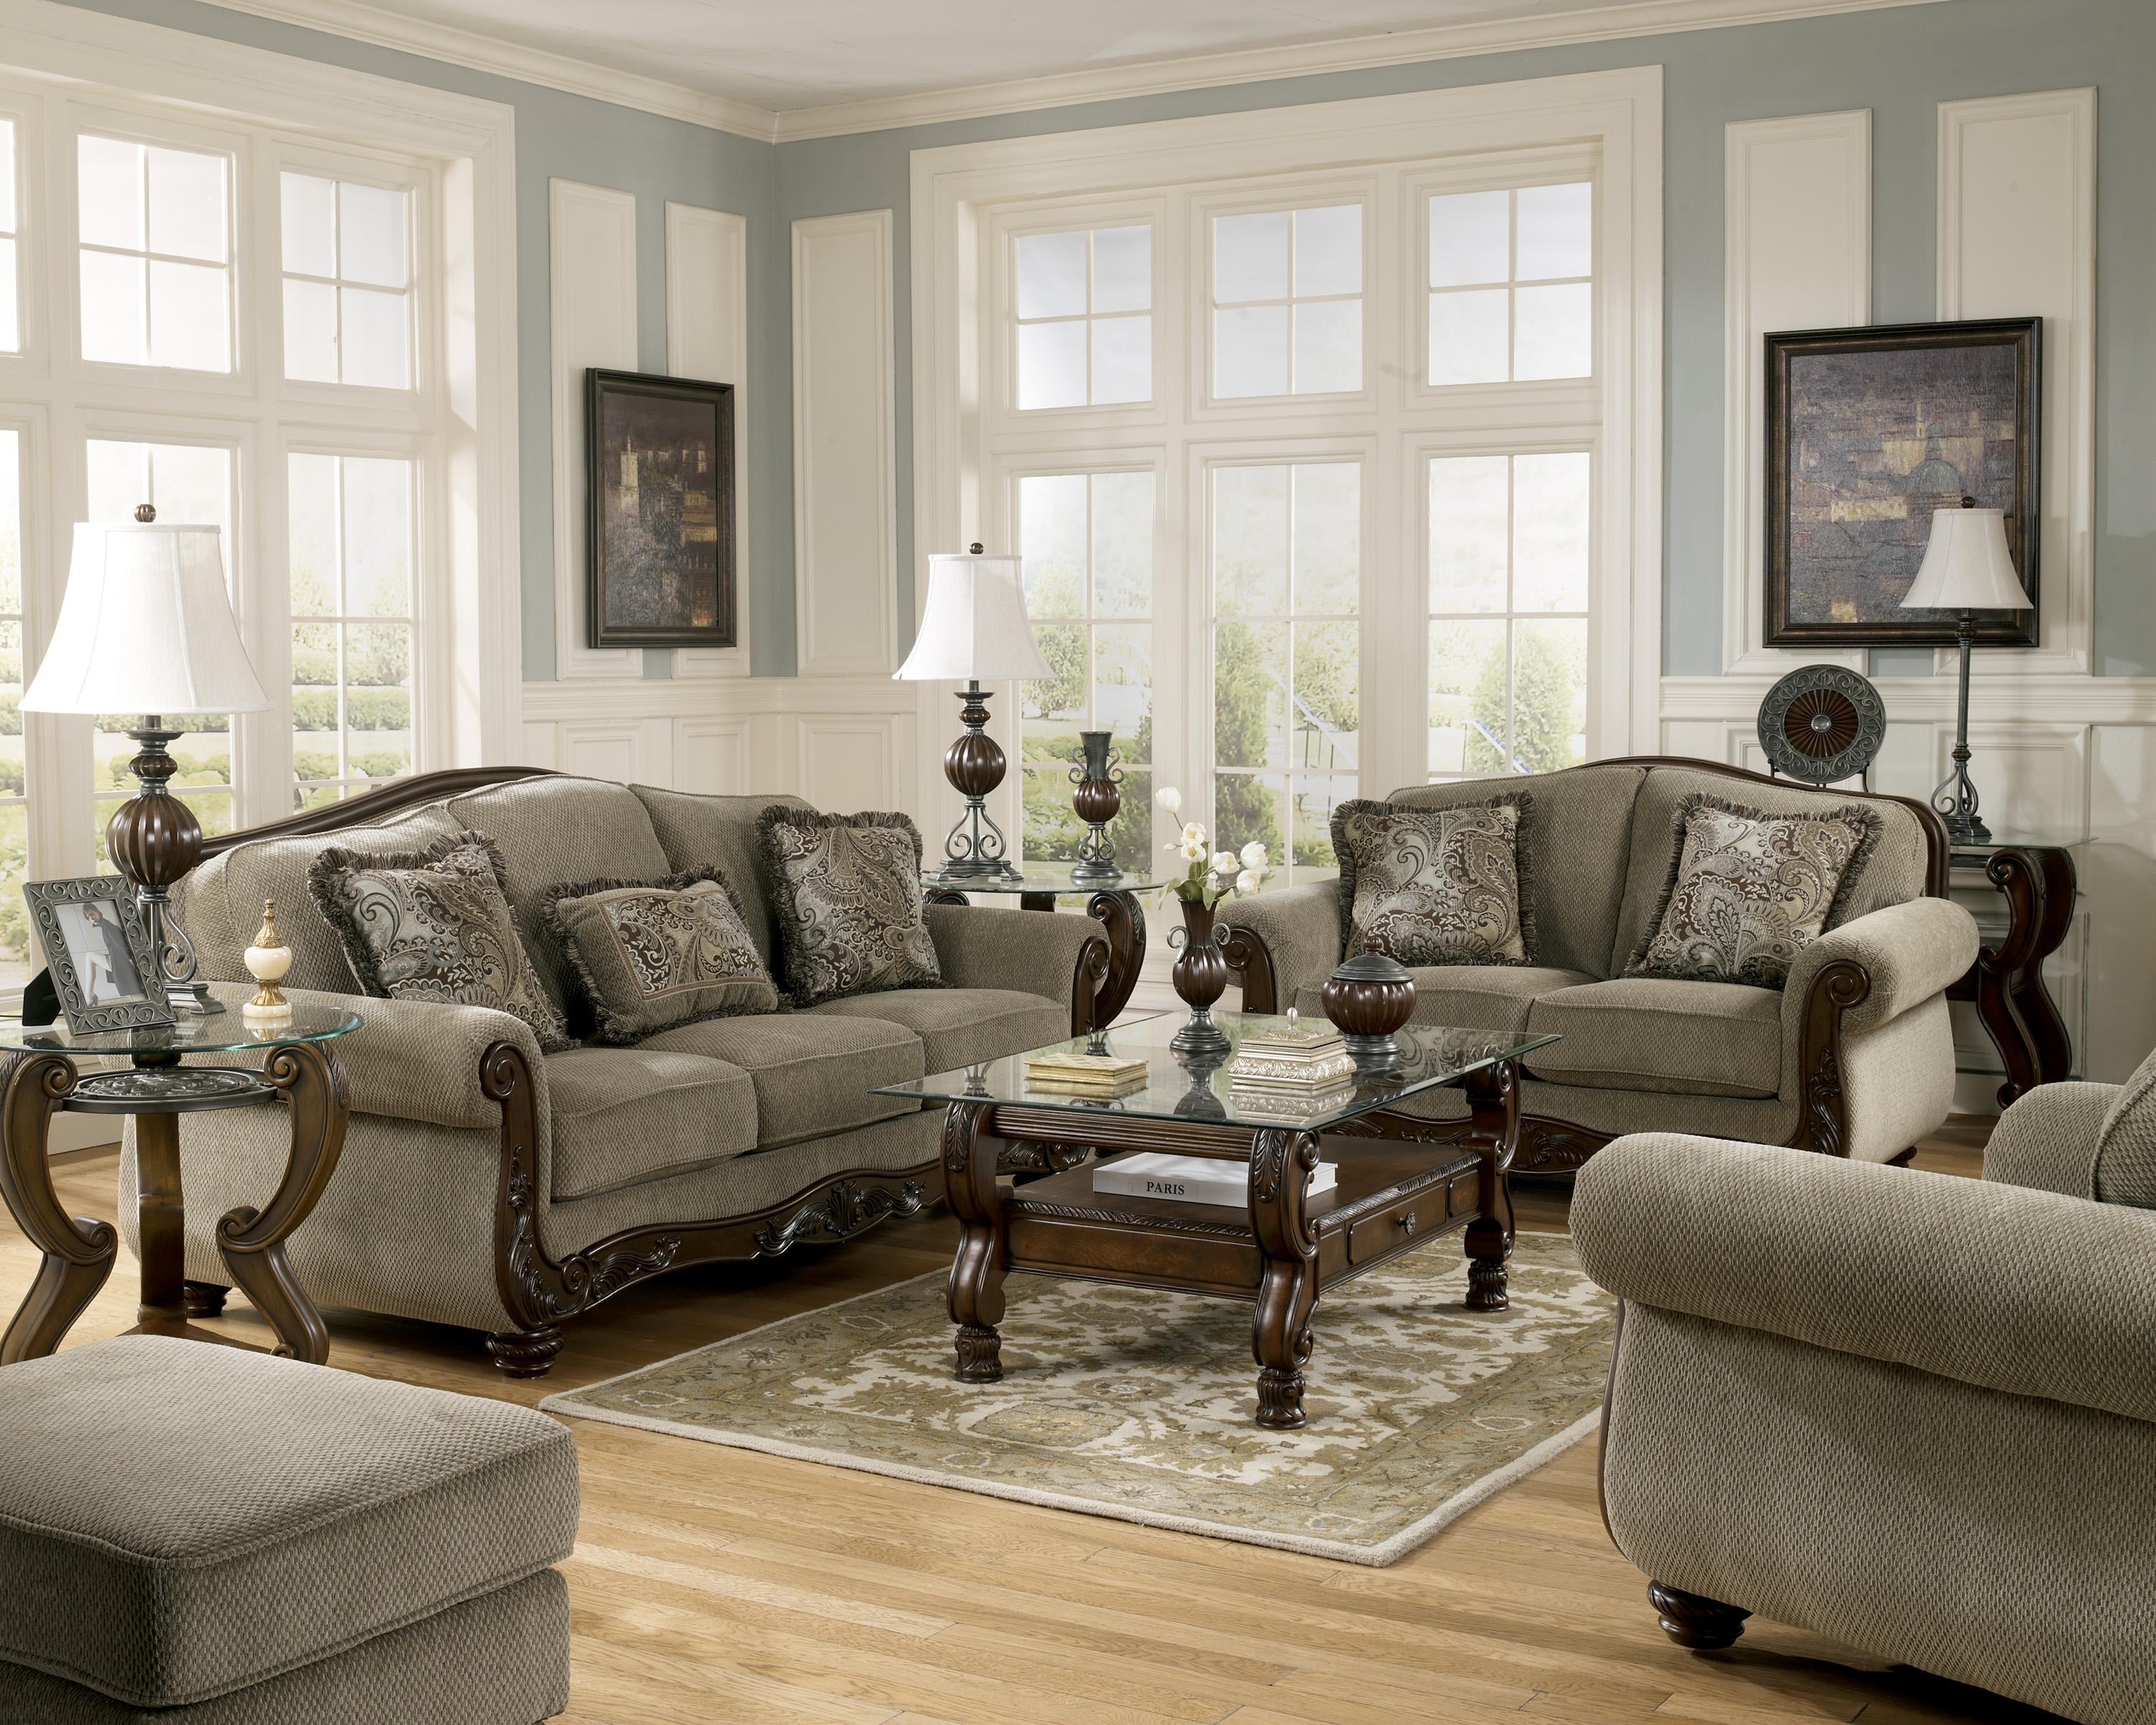 

    
Ashley Martinsburg 4 Piece Living Room Set in Meadow
